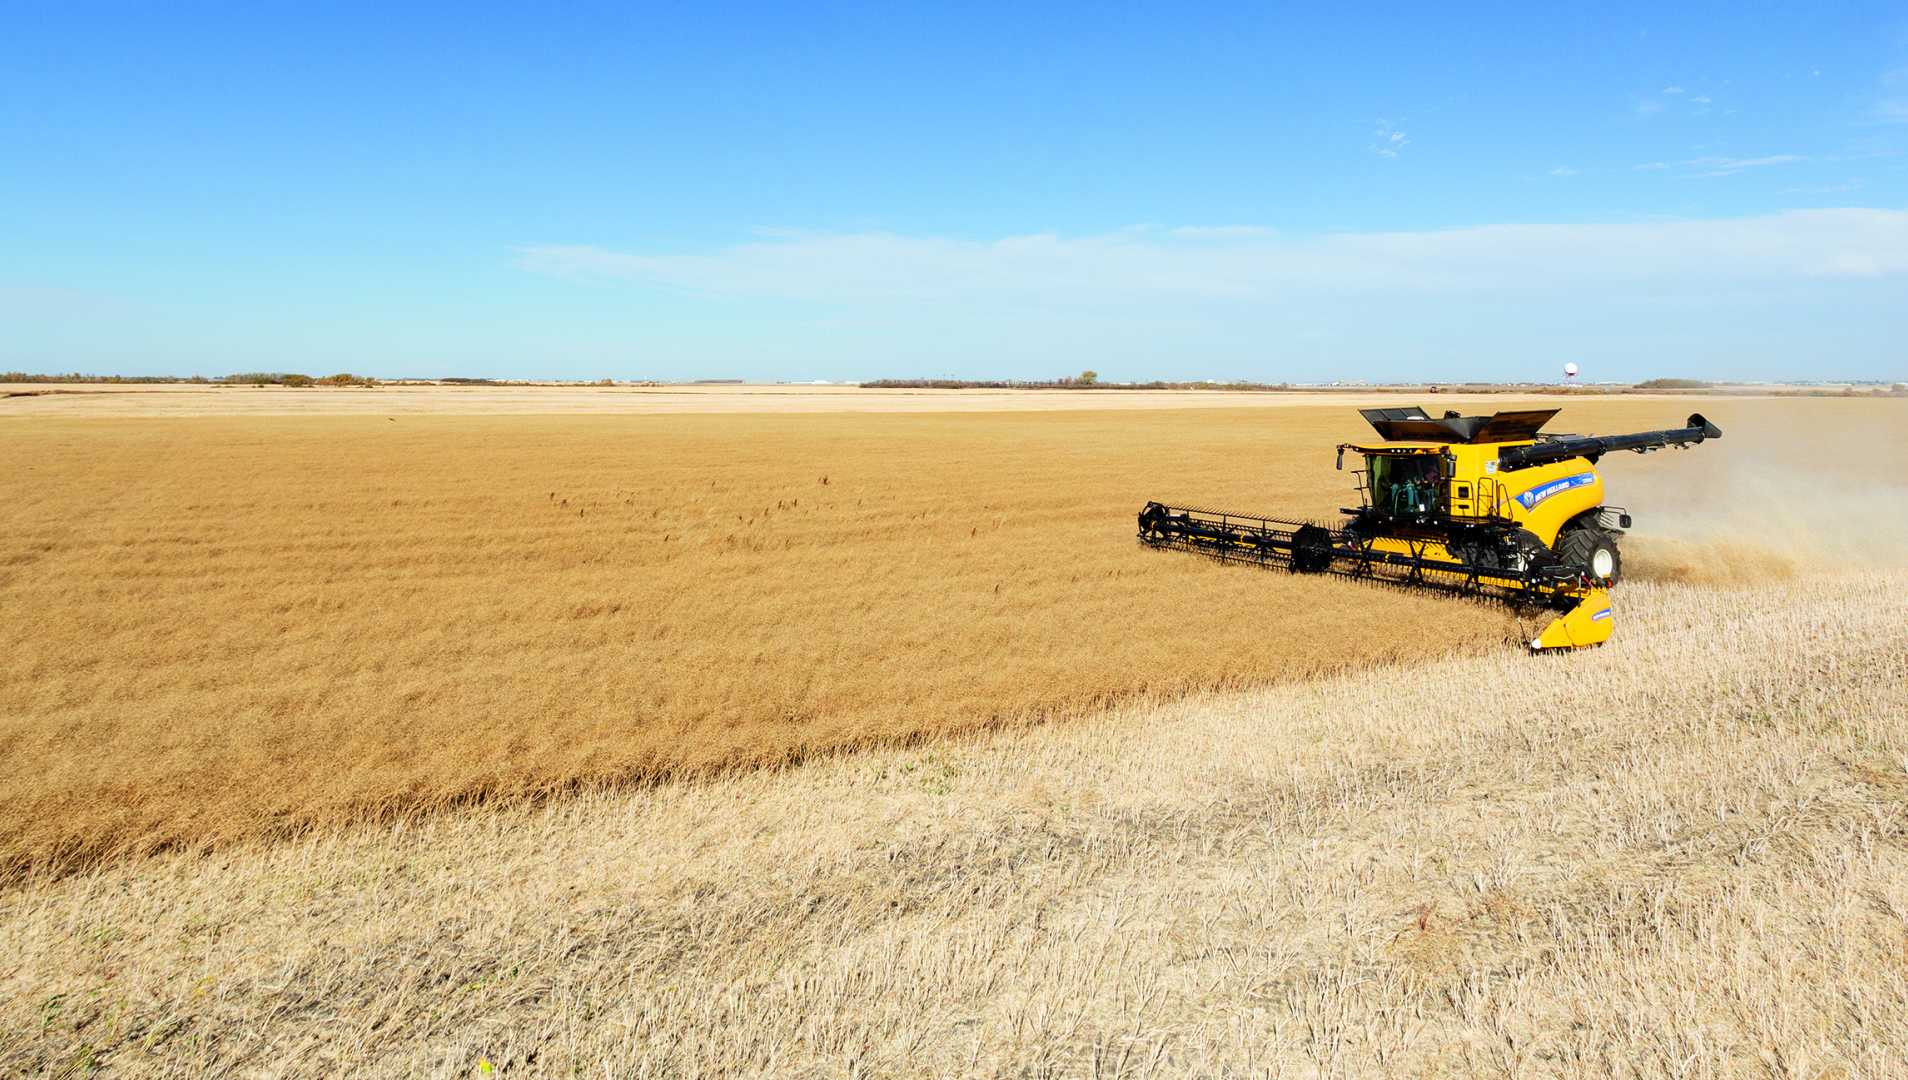 A New Holland combine in the middle right section of the photo moves along a field with a yellow gold crop.